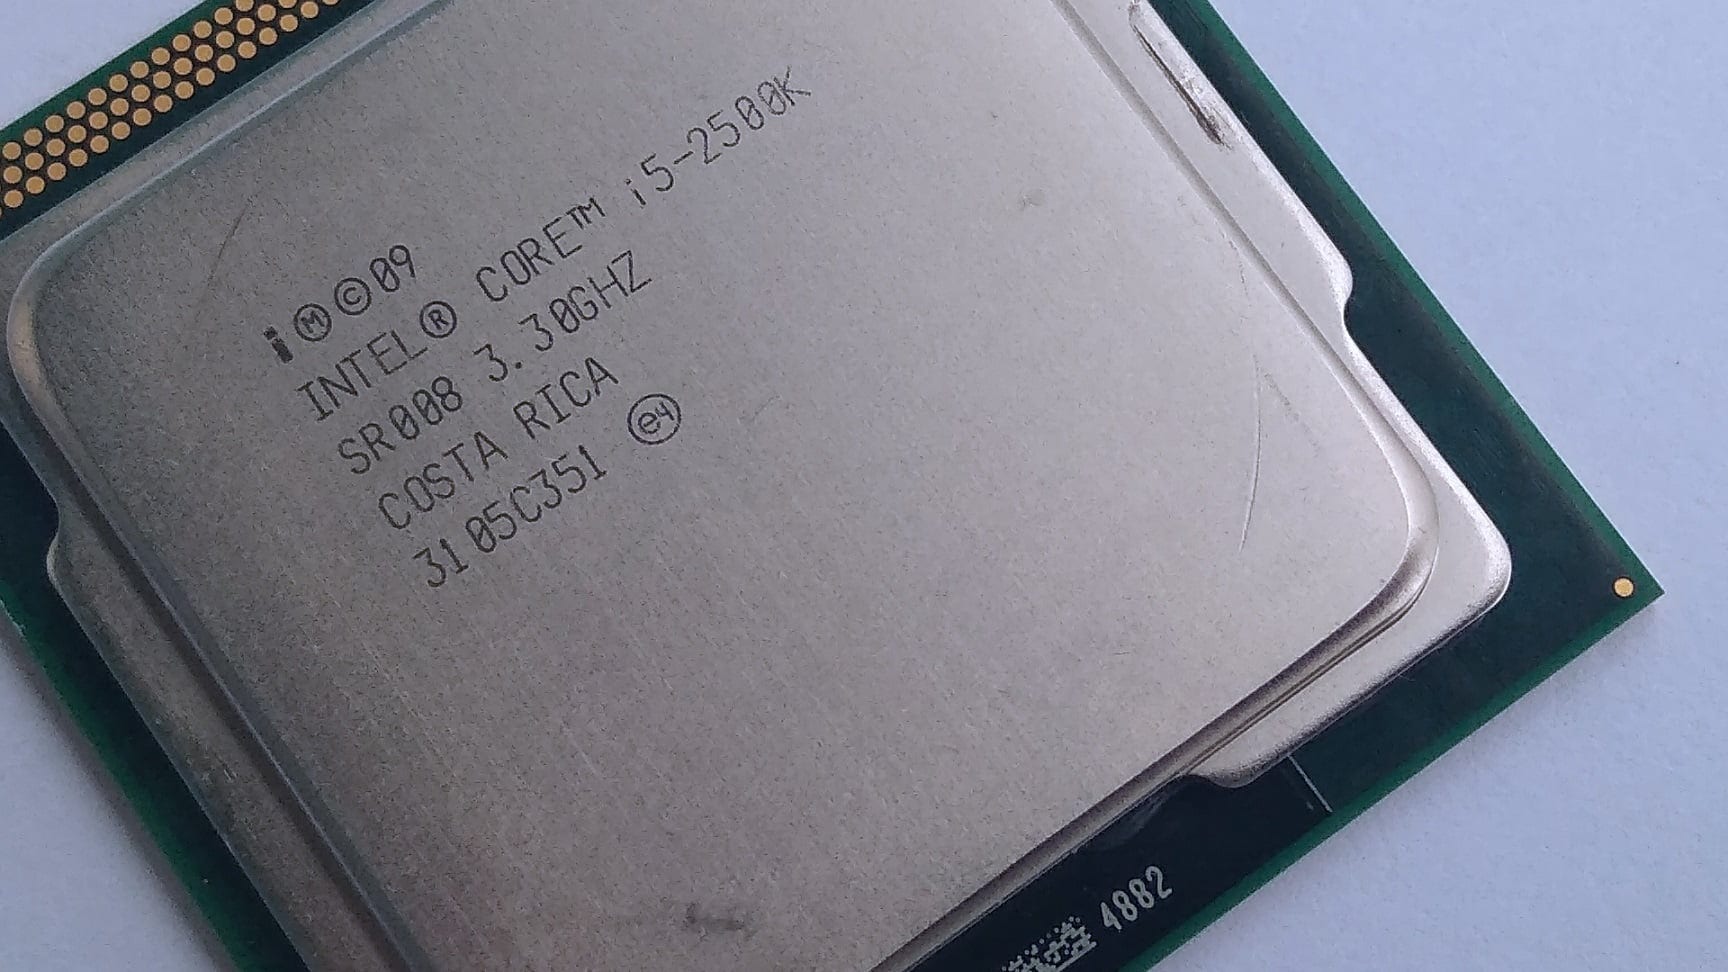 D0minat0r Overclocked The Core I5 2500k Chip To 63mhz And Surpassed His Own Record Umtale Lab